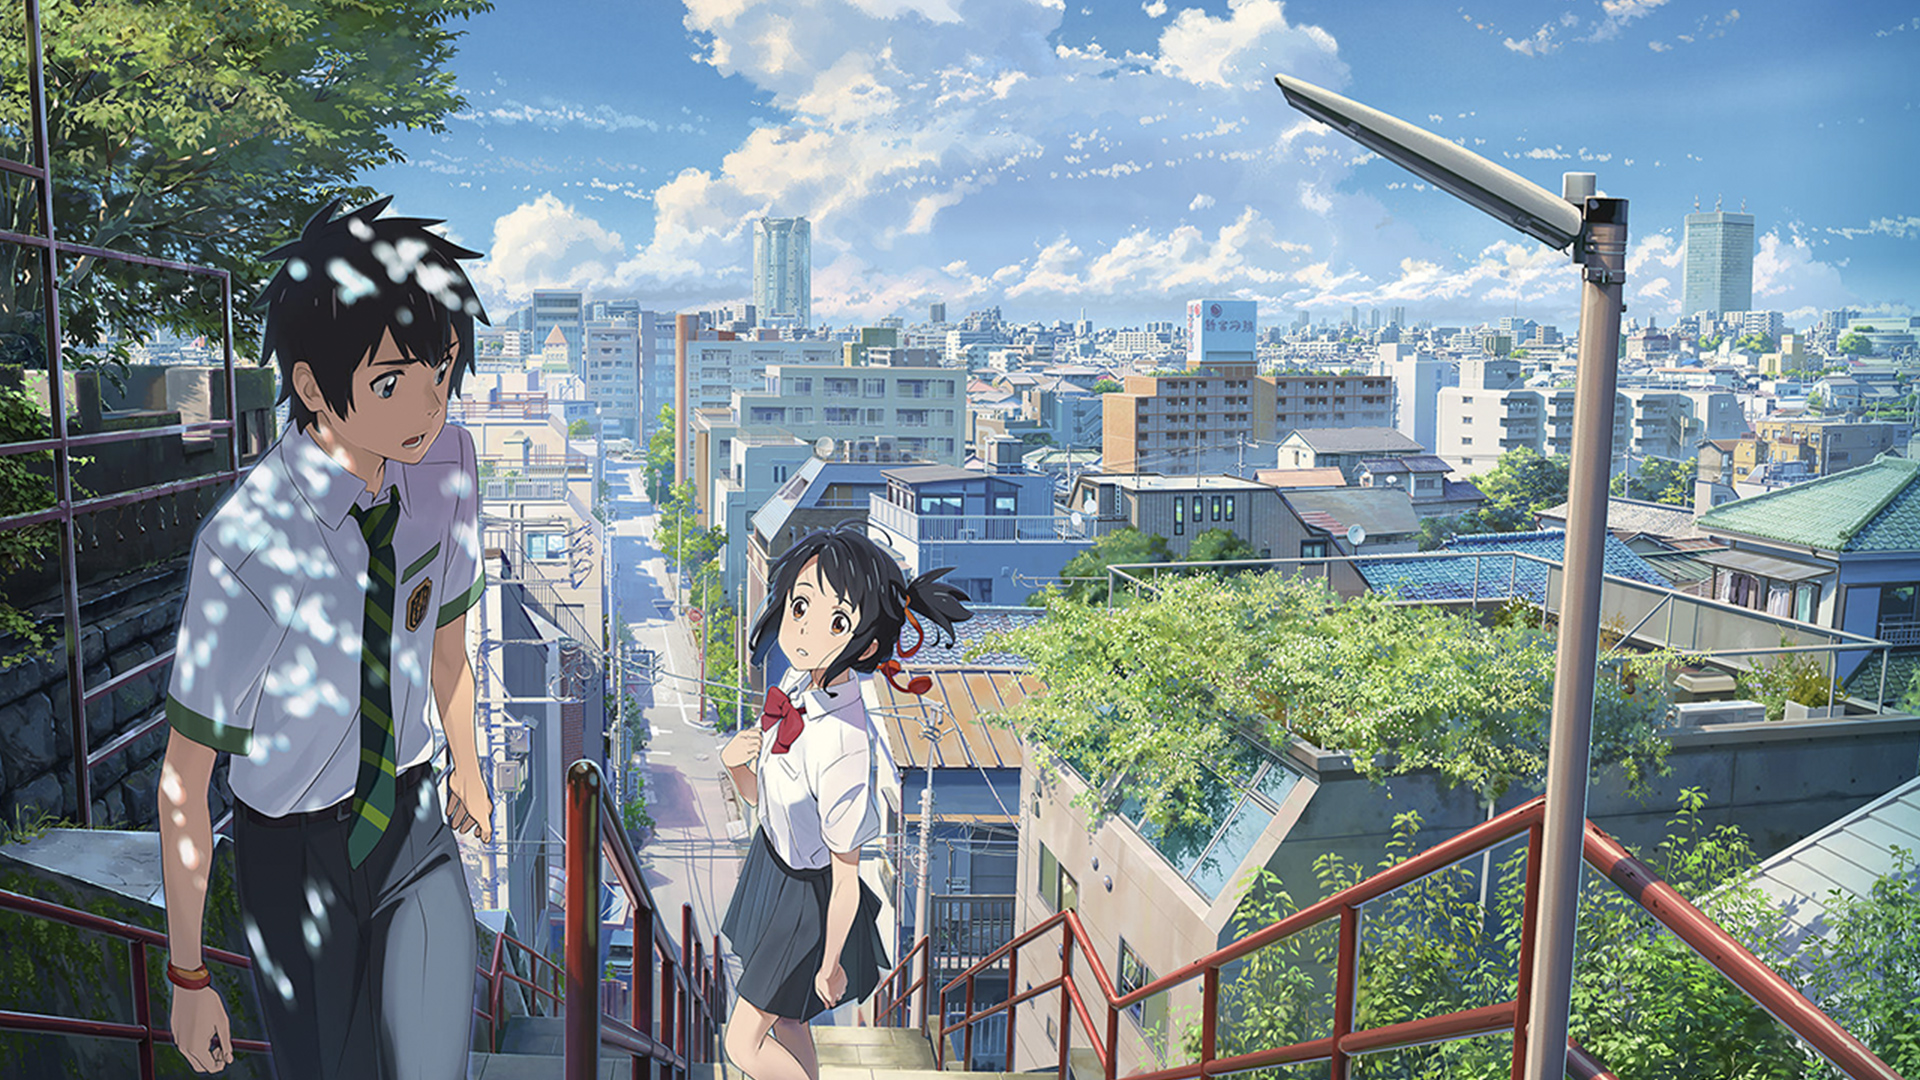 Mitsuha and Taki from Your Name